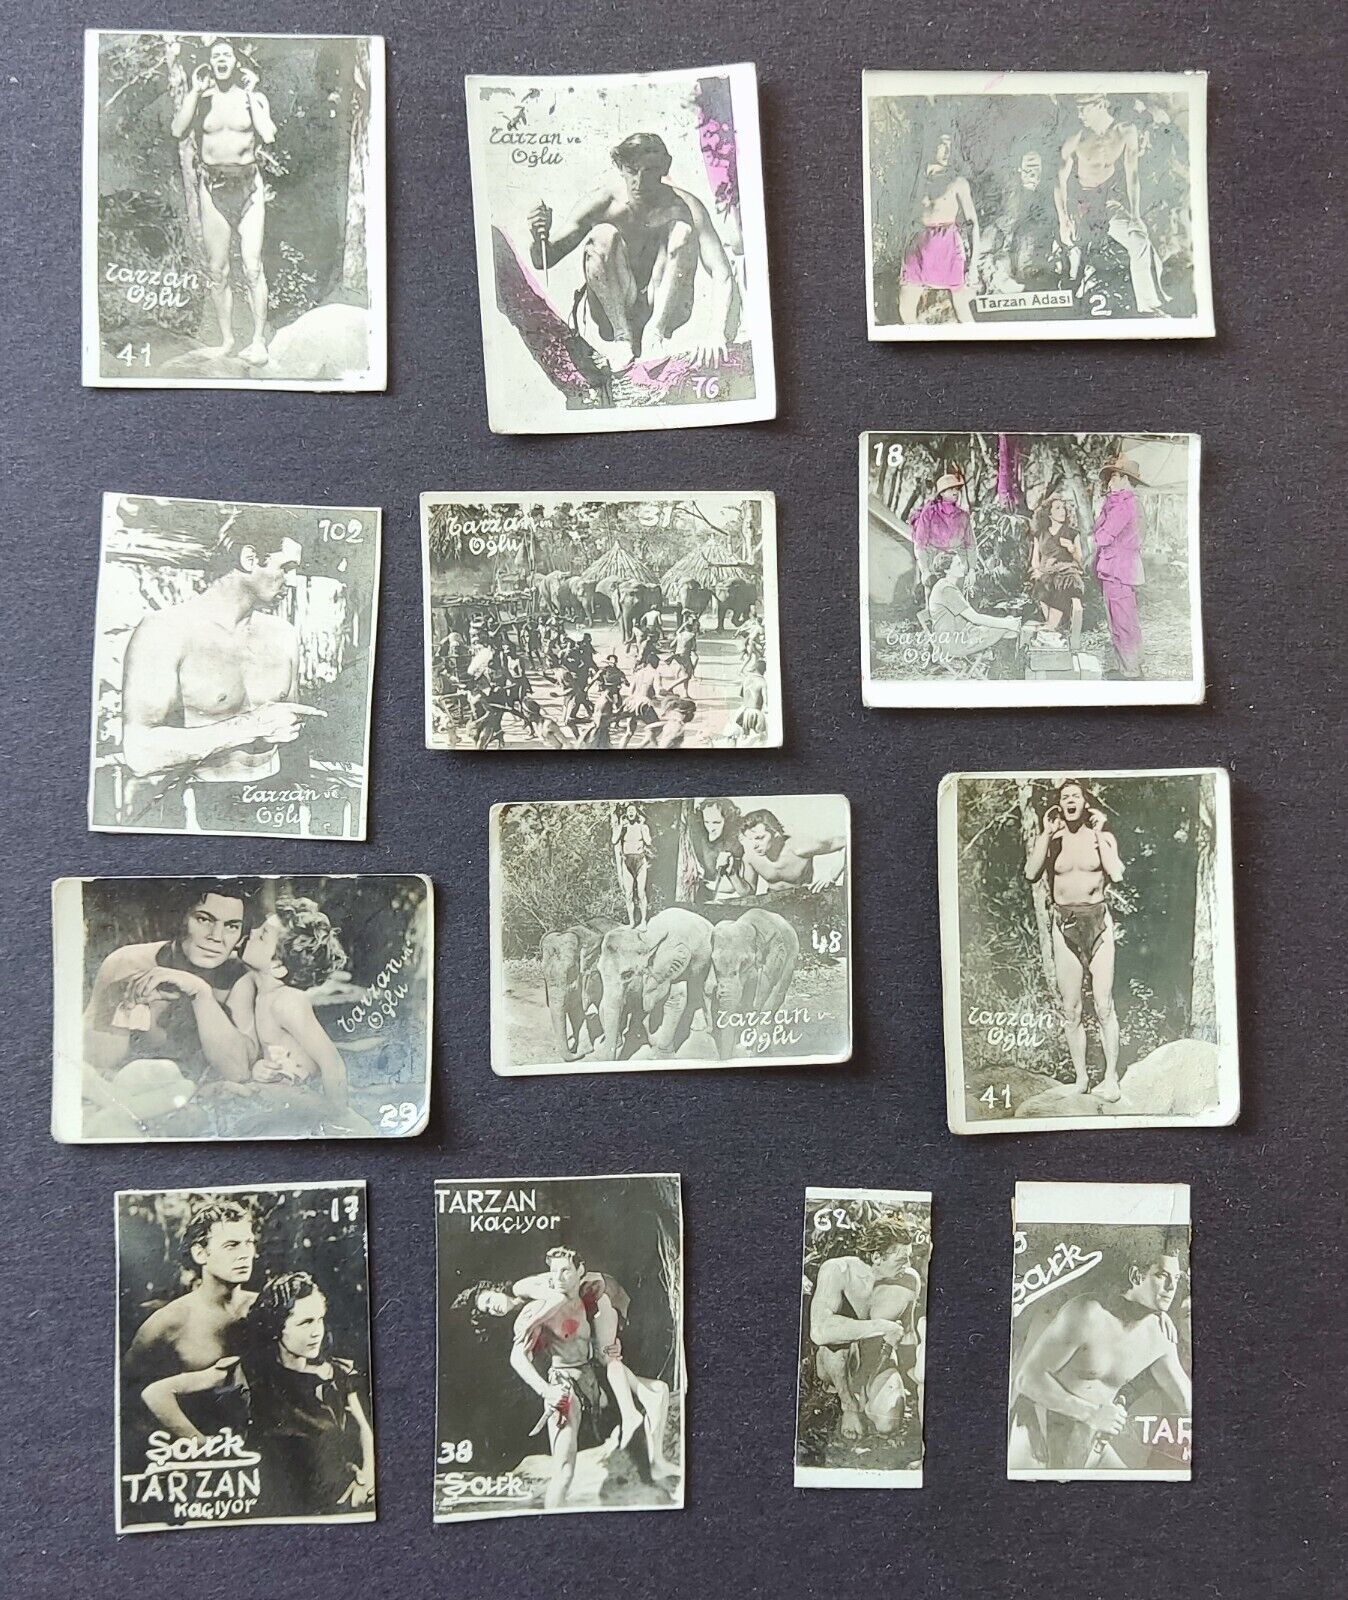 13 Vintage Tarzan Chocolate Cards, 1939, Johnny Weissmuller - Extremely Rare